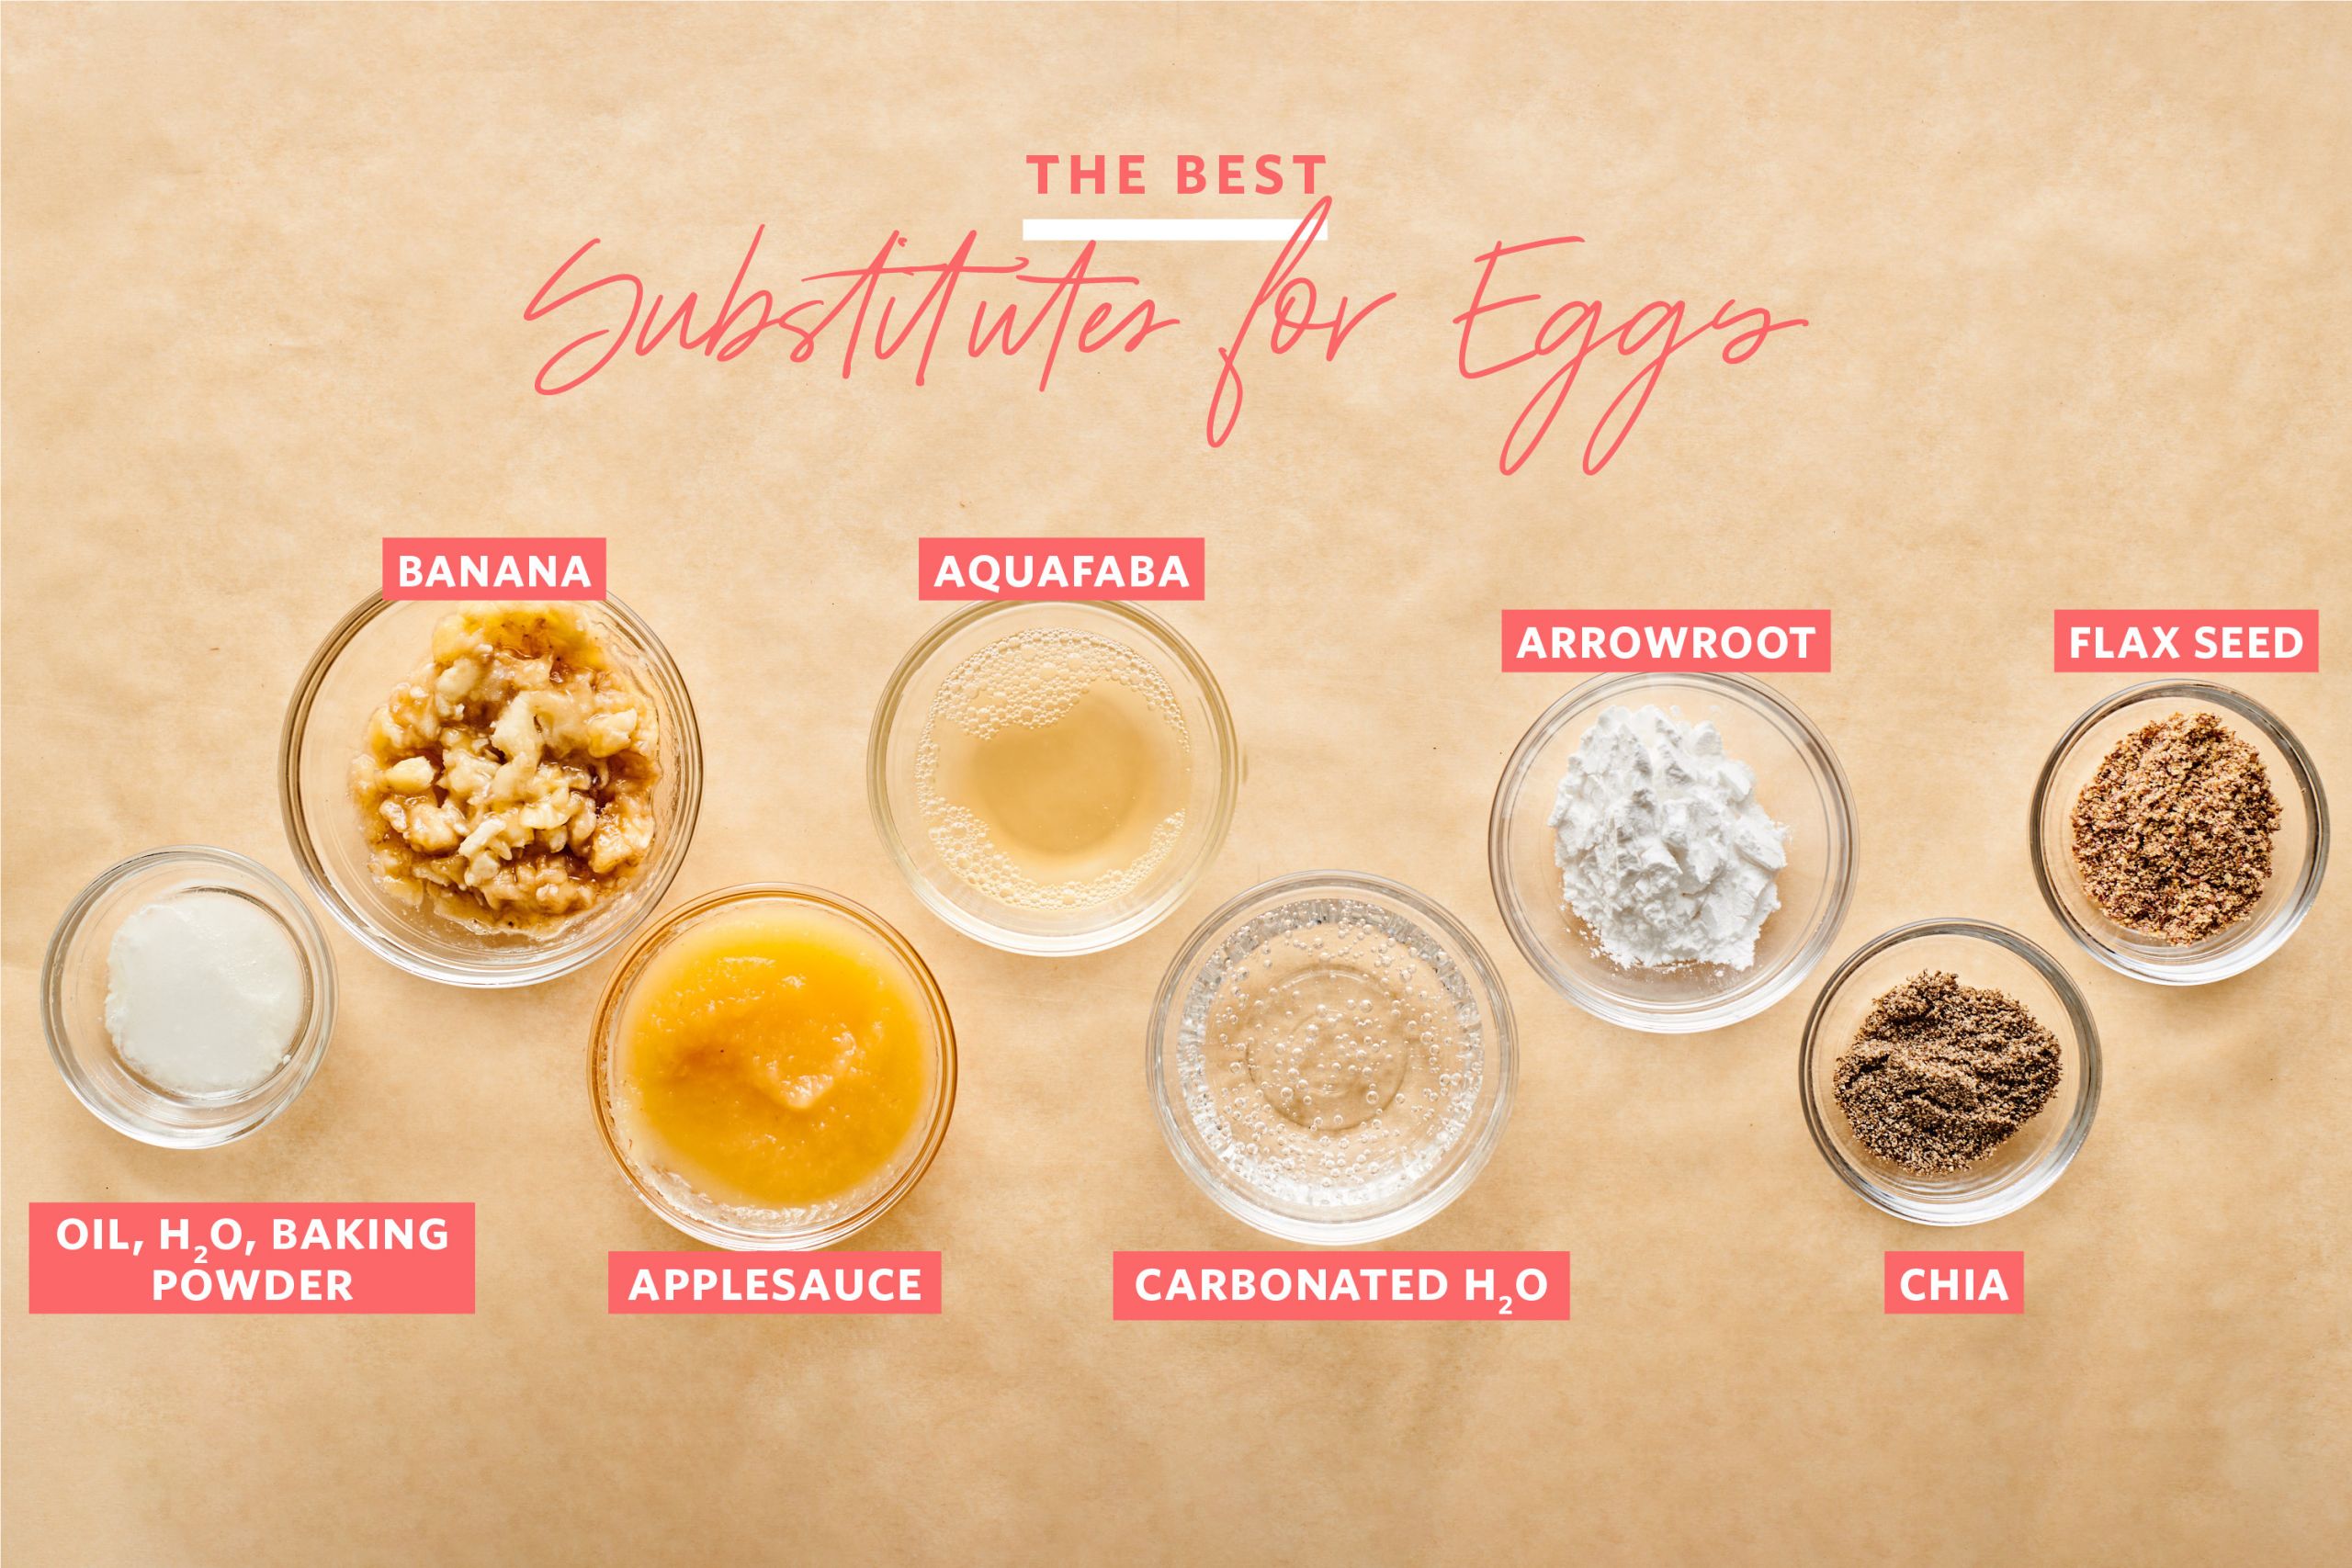 Egg Substitute for Bread Best Of What Can You Substitute for Eggs In Banana Bread Banana